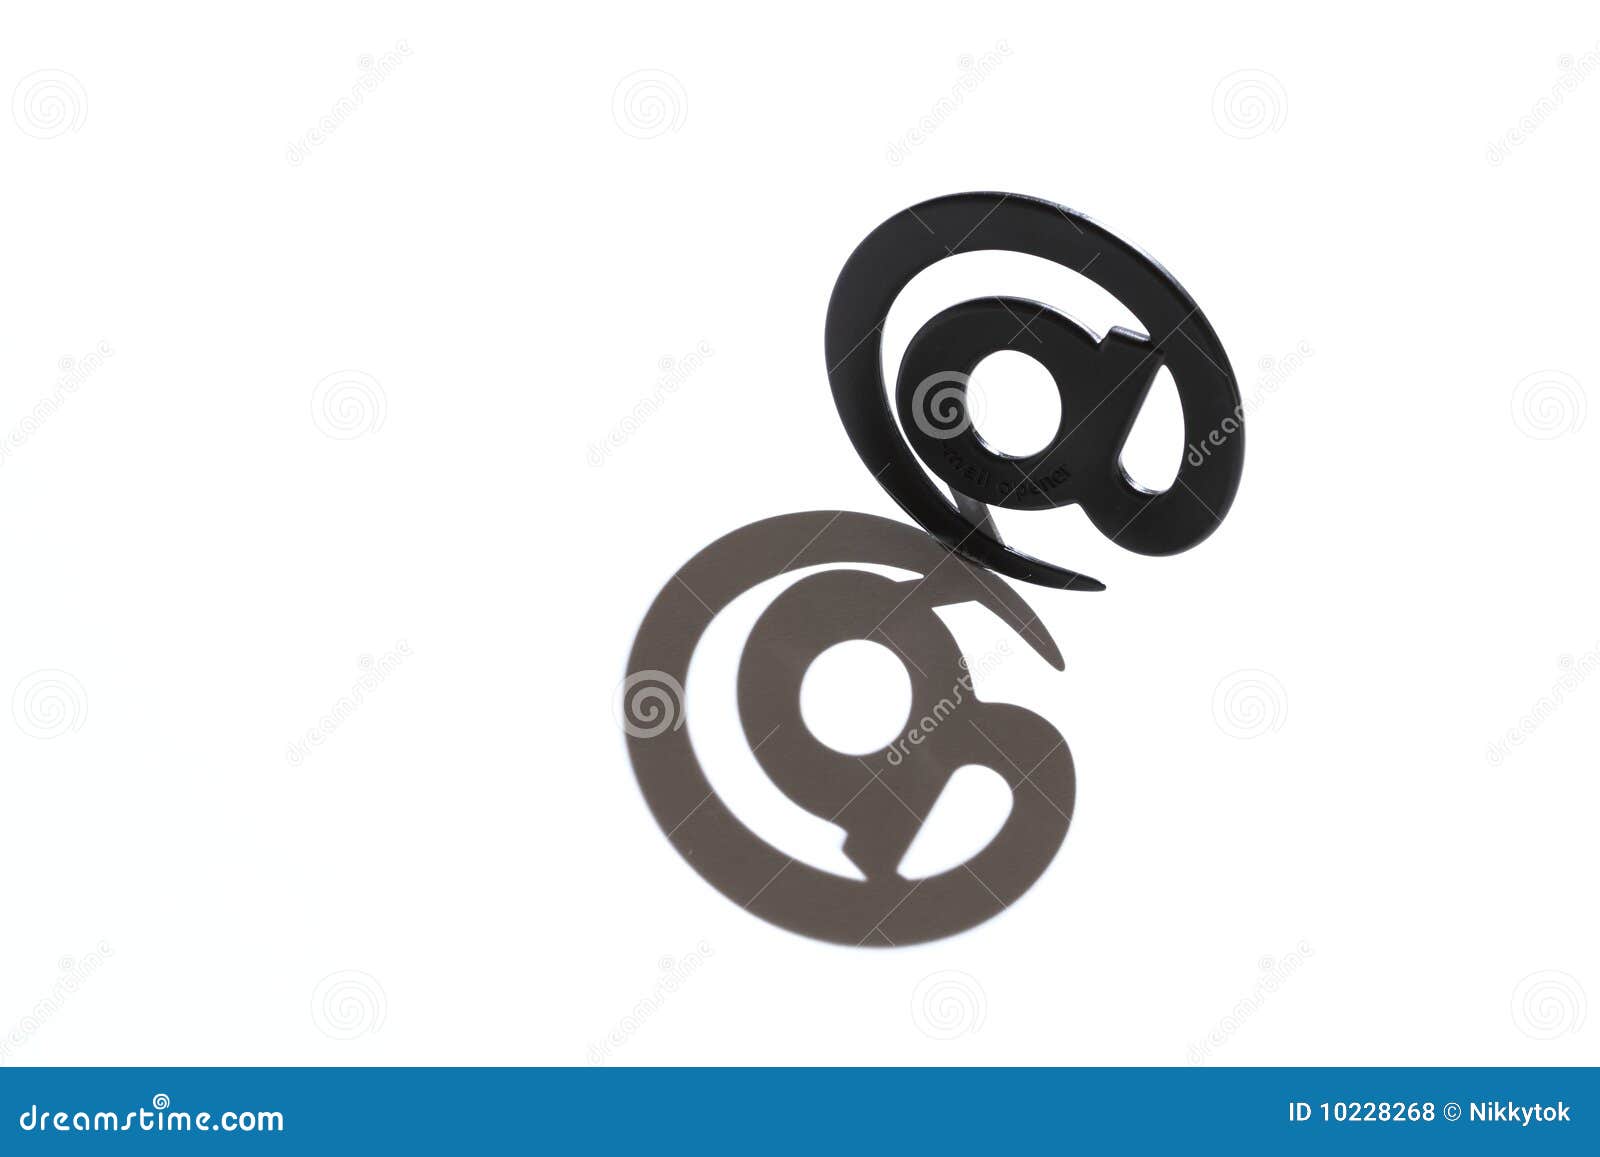 Email sign stock photo. Image of conceptual, commerce - 10228268